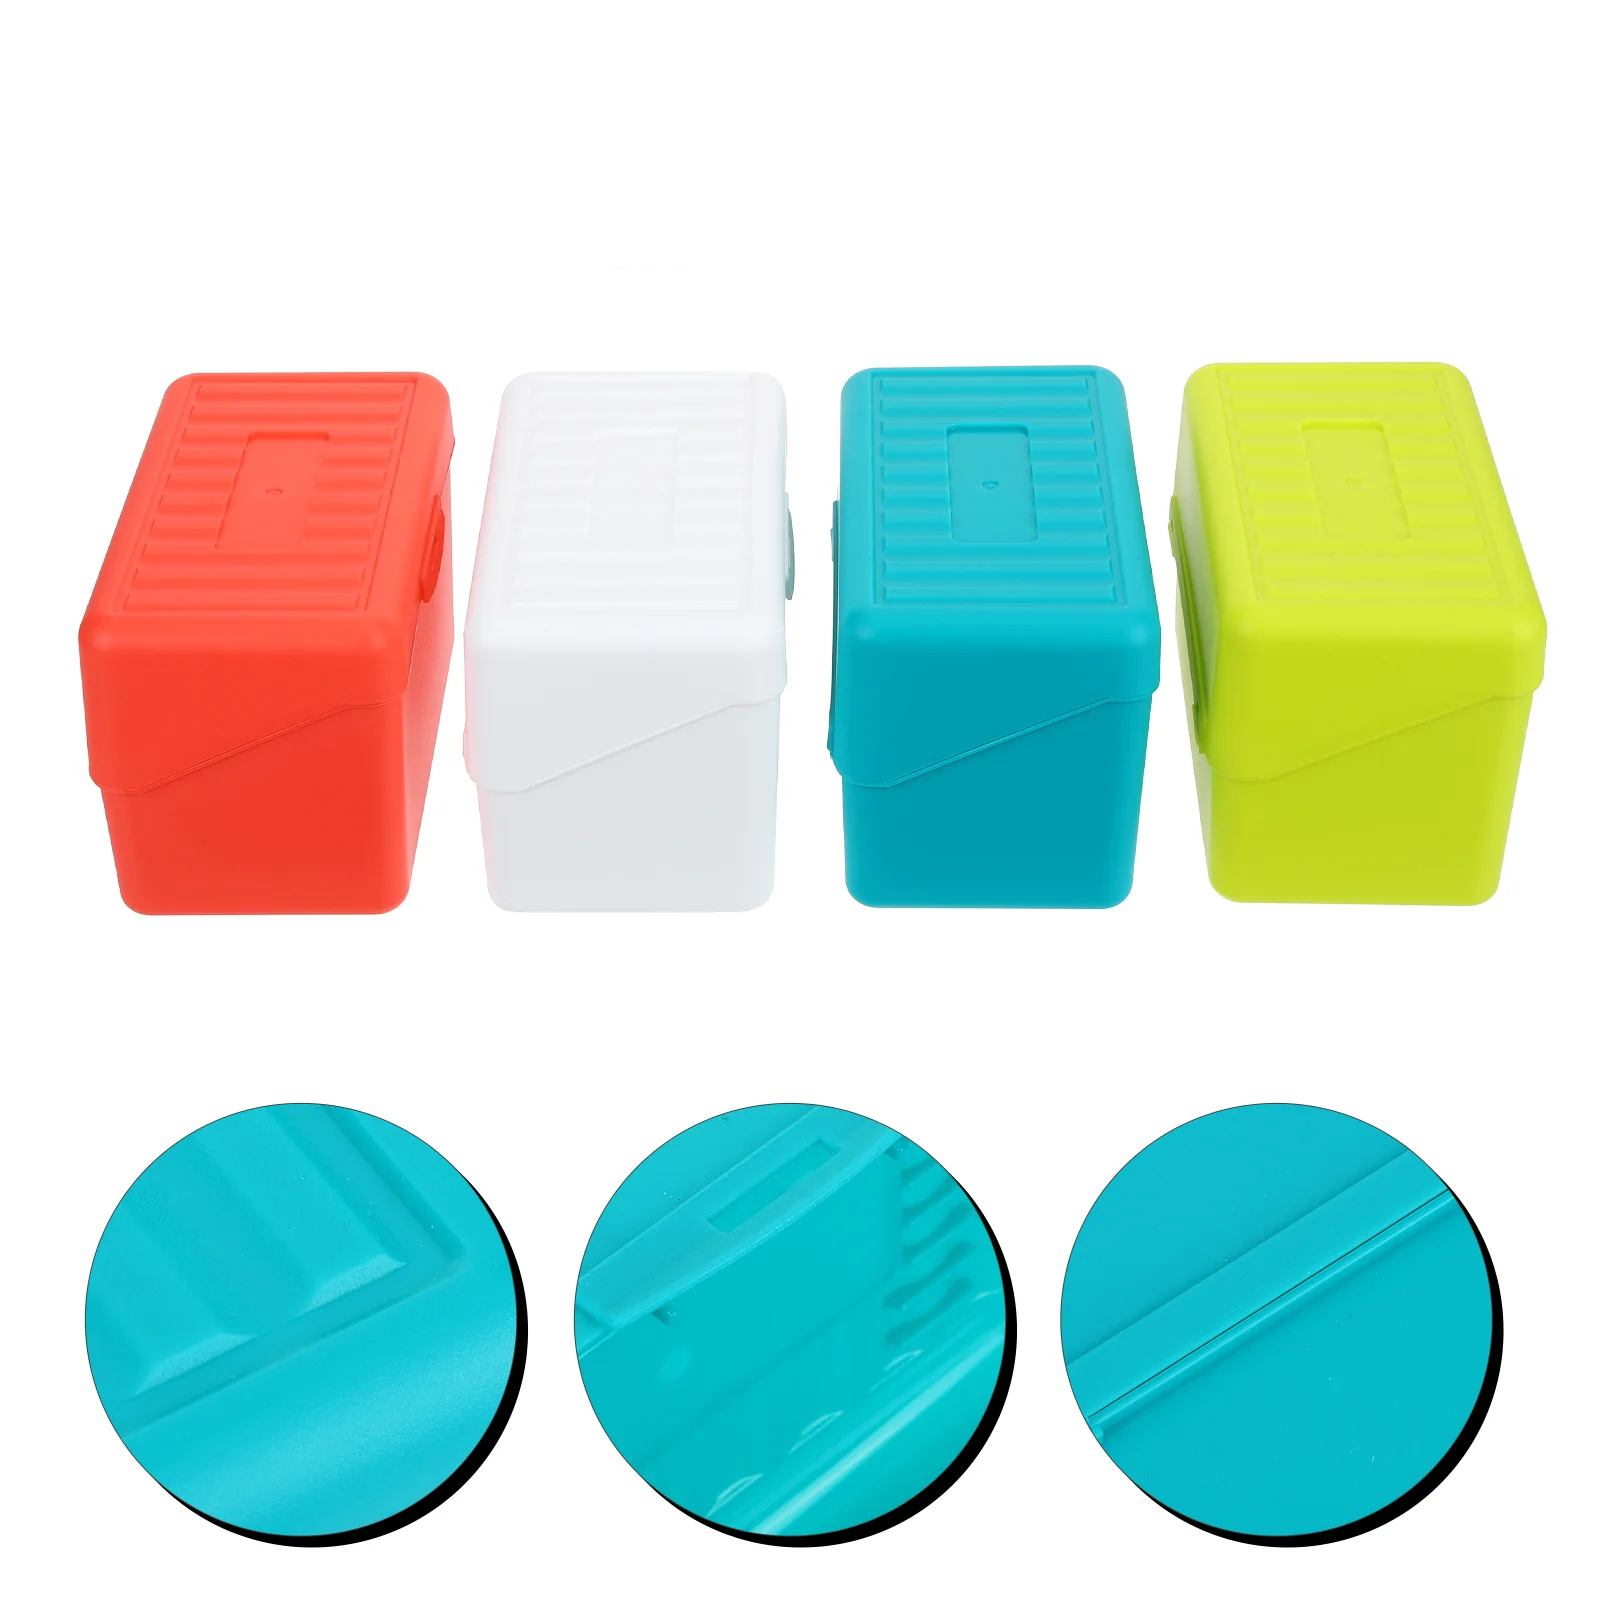 

4 Pcs Plastic Go Containers Index Card File Box Holder 3x5 Bracket Flash Case Pp Note Cards